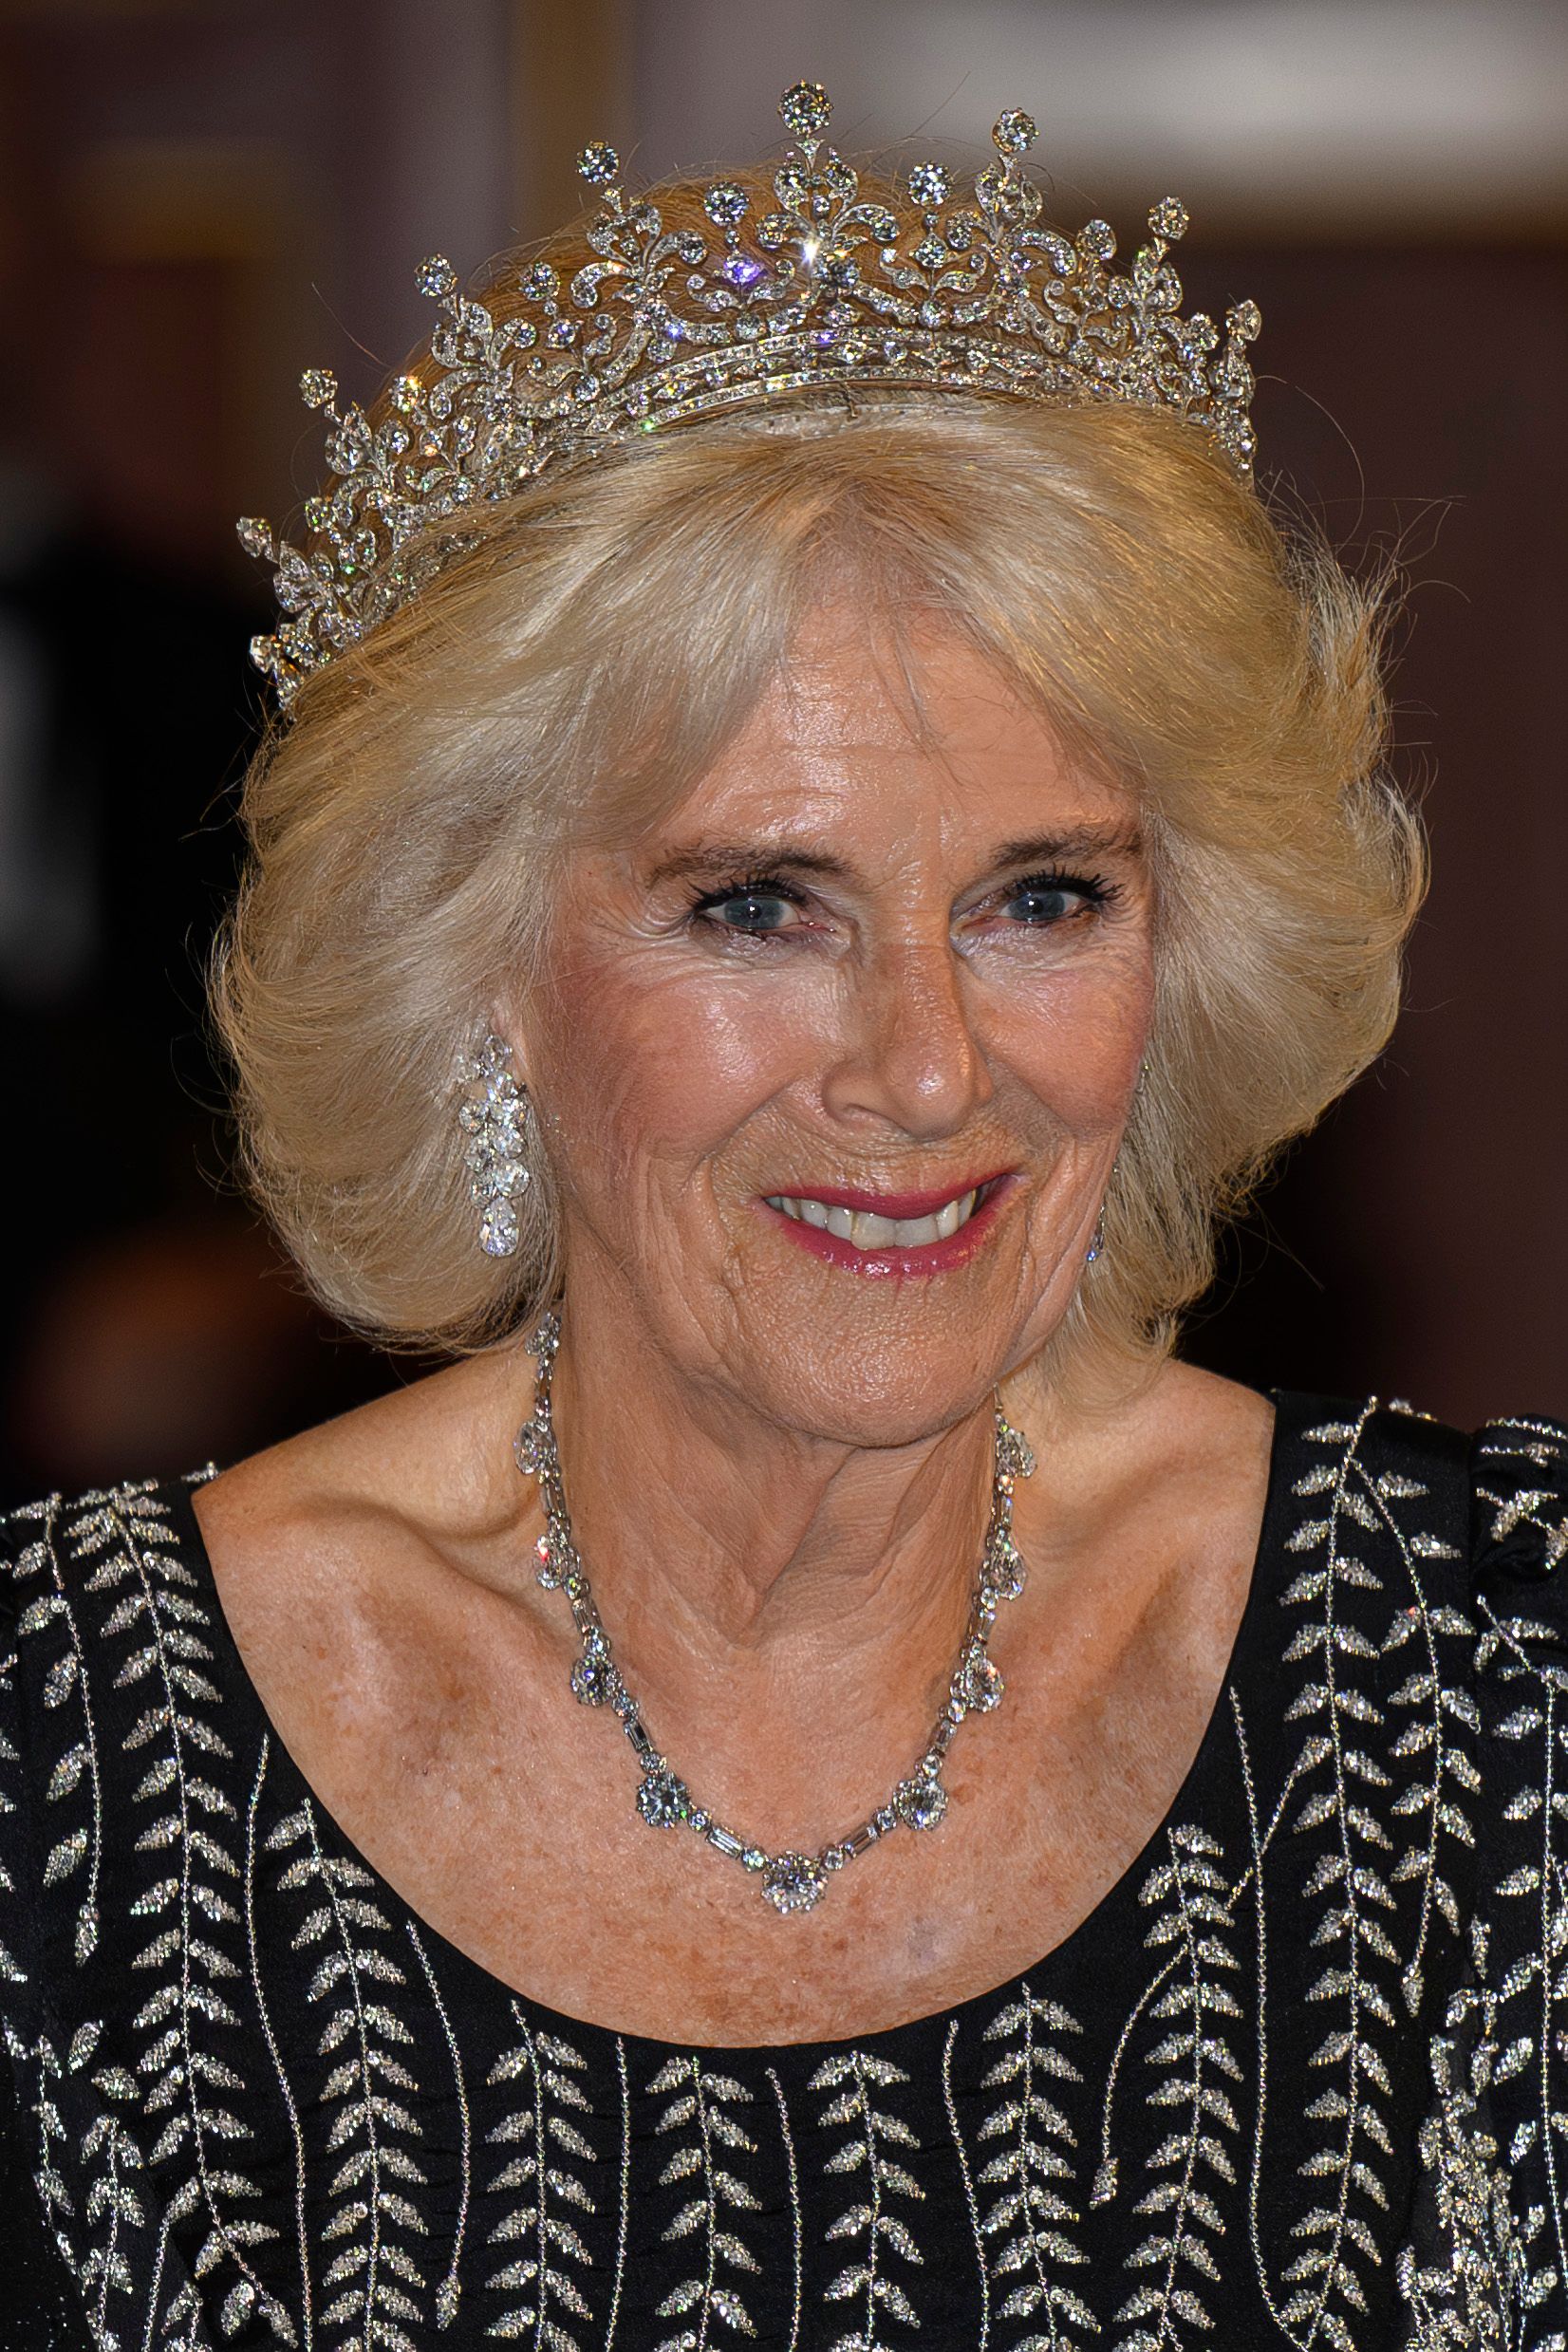 <p><span>On Oct. 18, 2023, Queen Camilla made her debut in the Girls of Great Britain and Ireland tiara, an iconic headpiece that was originally gifted to Queen Mary as a wedding present in 1893. Queen Mary, in turn, gifted the piece to Queen Elizabeth II as a wedding present when she married Prince Philip in 1947. (Elizabeth reportedly referred to the crown as "Granny's tiara.")</span></p><p>Camilla also donned diamond drop-earrings, plus a diamond necklace and matching bracelet that her late mother-in-law received as 21st birthday presents from the then-prime minister of South Africa.</p><p>She chose the special pieces for a ceremonial dinner at Mansion House that she attended with King Charles III to mark their first official visit to the City of London following their coronation. </p>